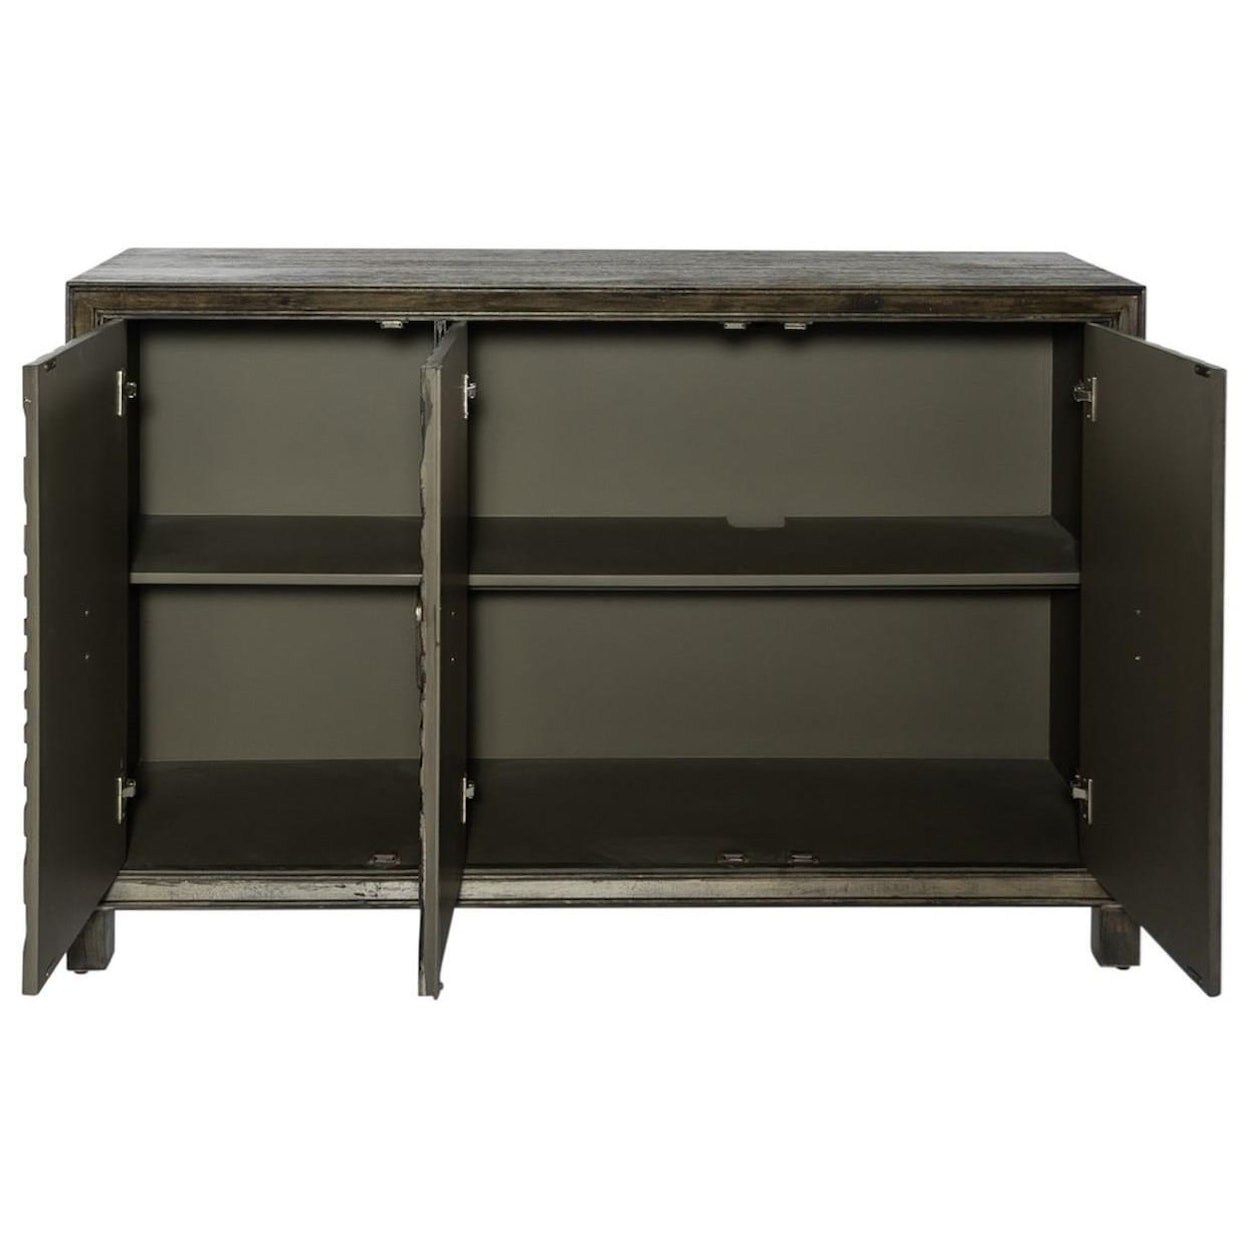 Libby Chaucer 3-Door Accent Cabinet